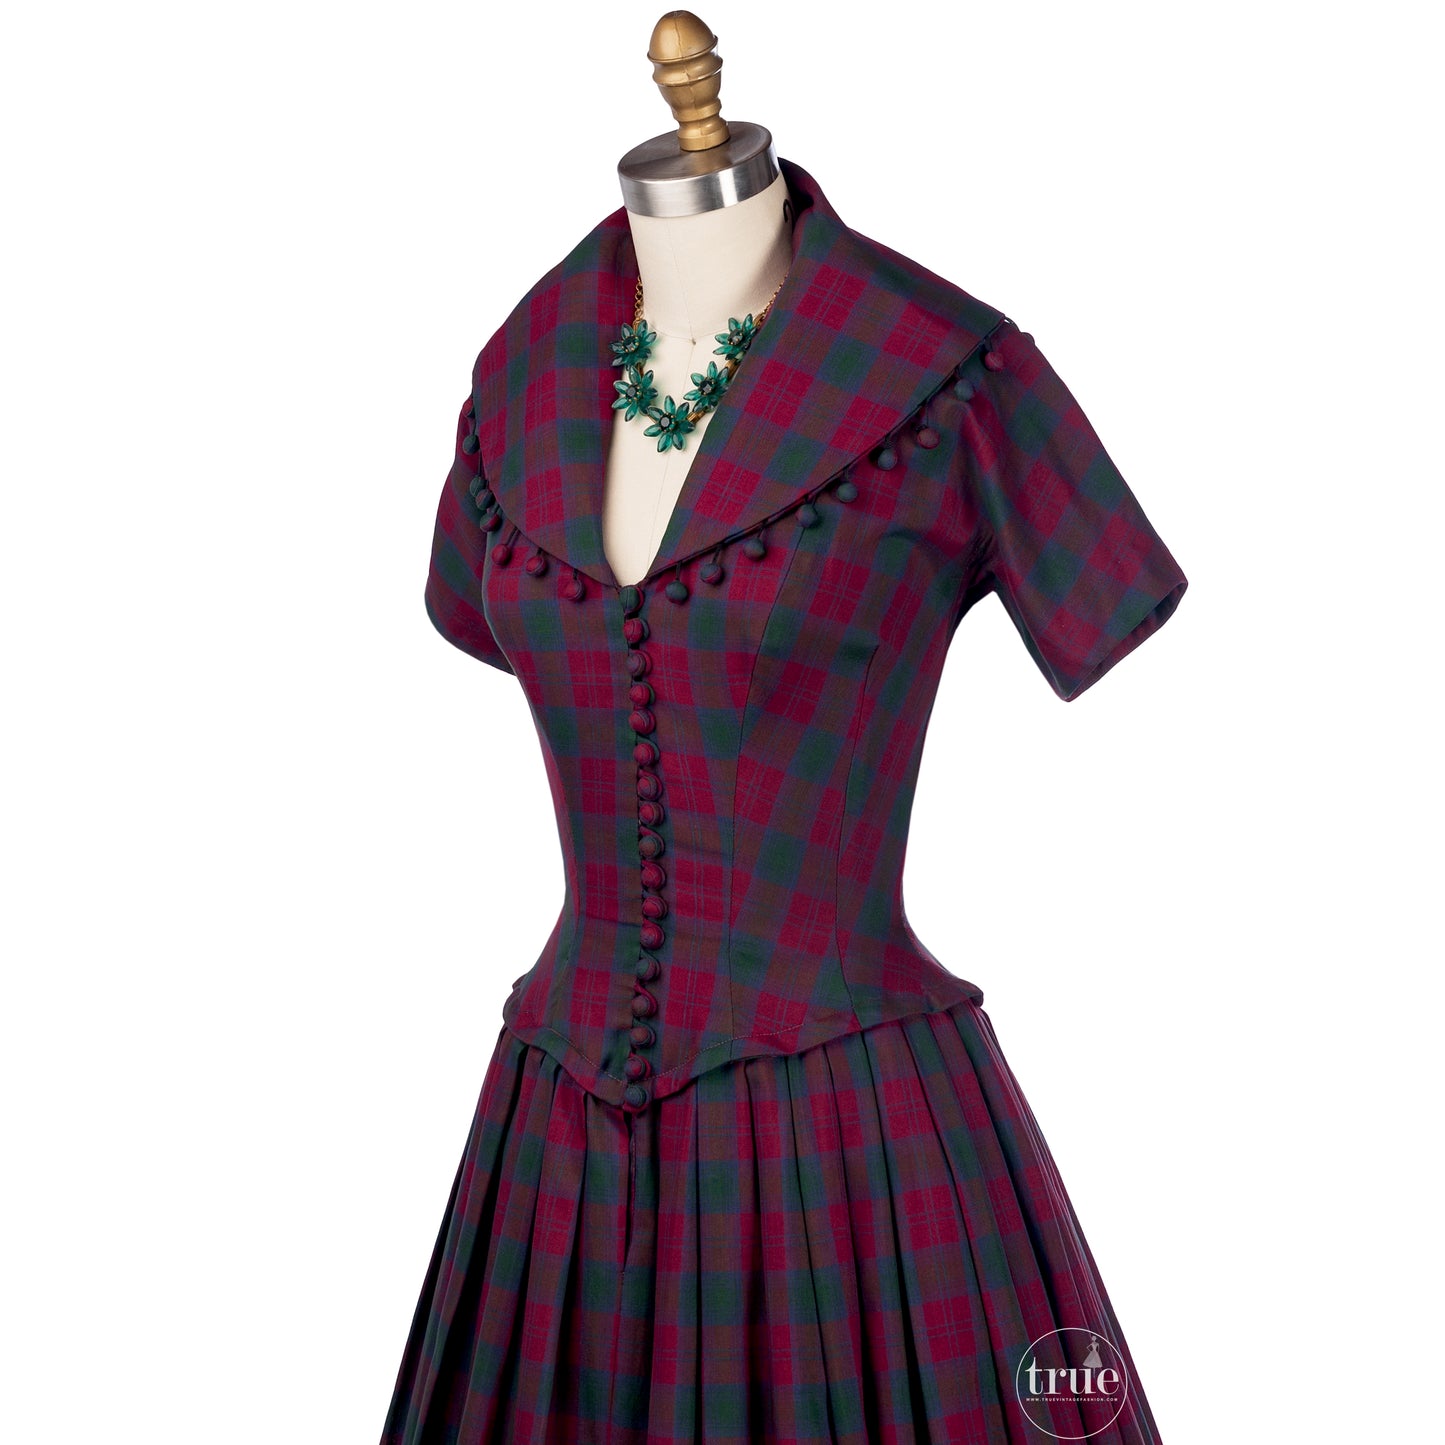 vintage 1950's dress ...Suzy Perette new look plaid full skirt dress with ball fringe